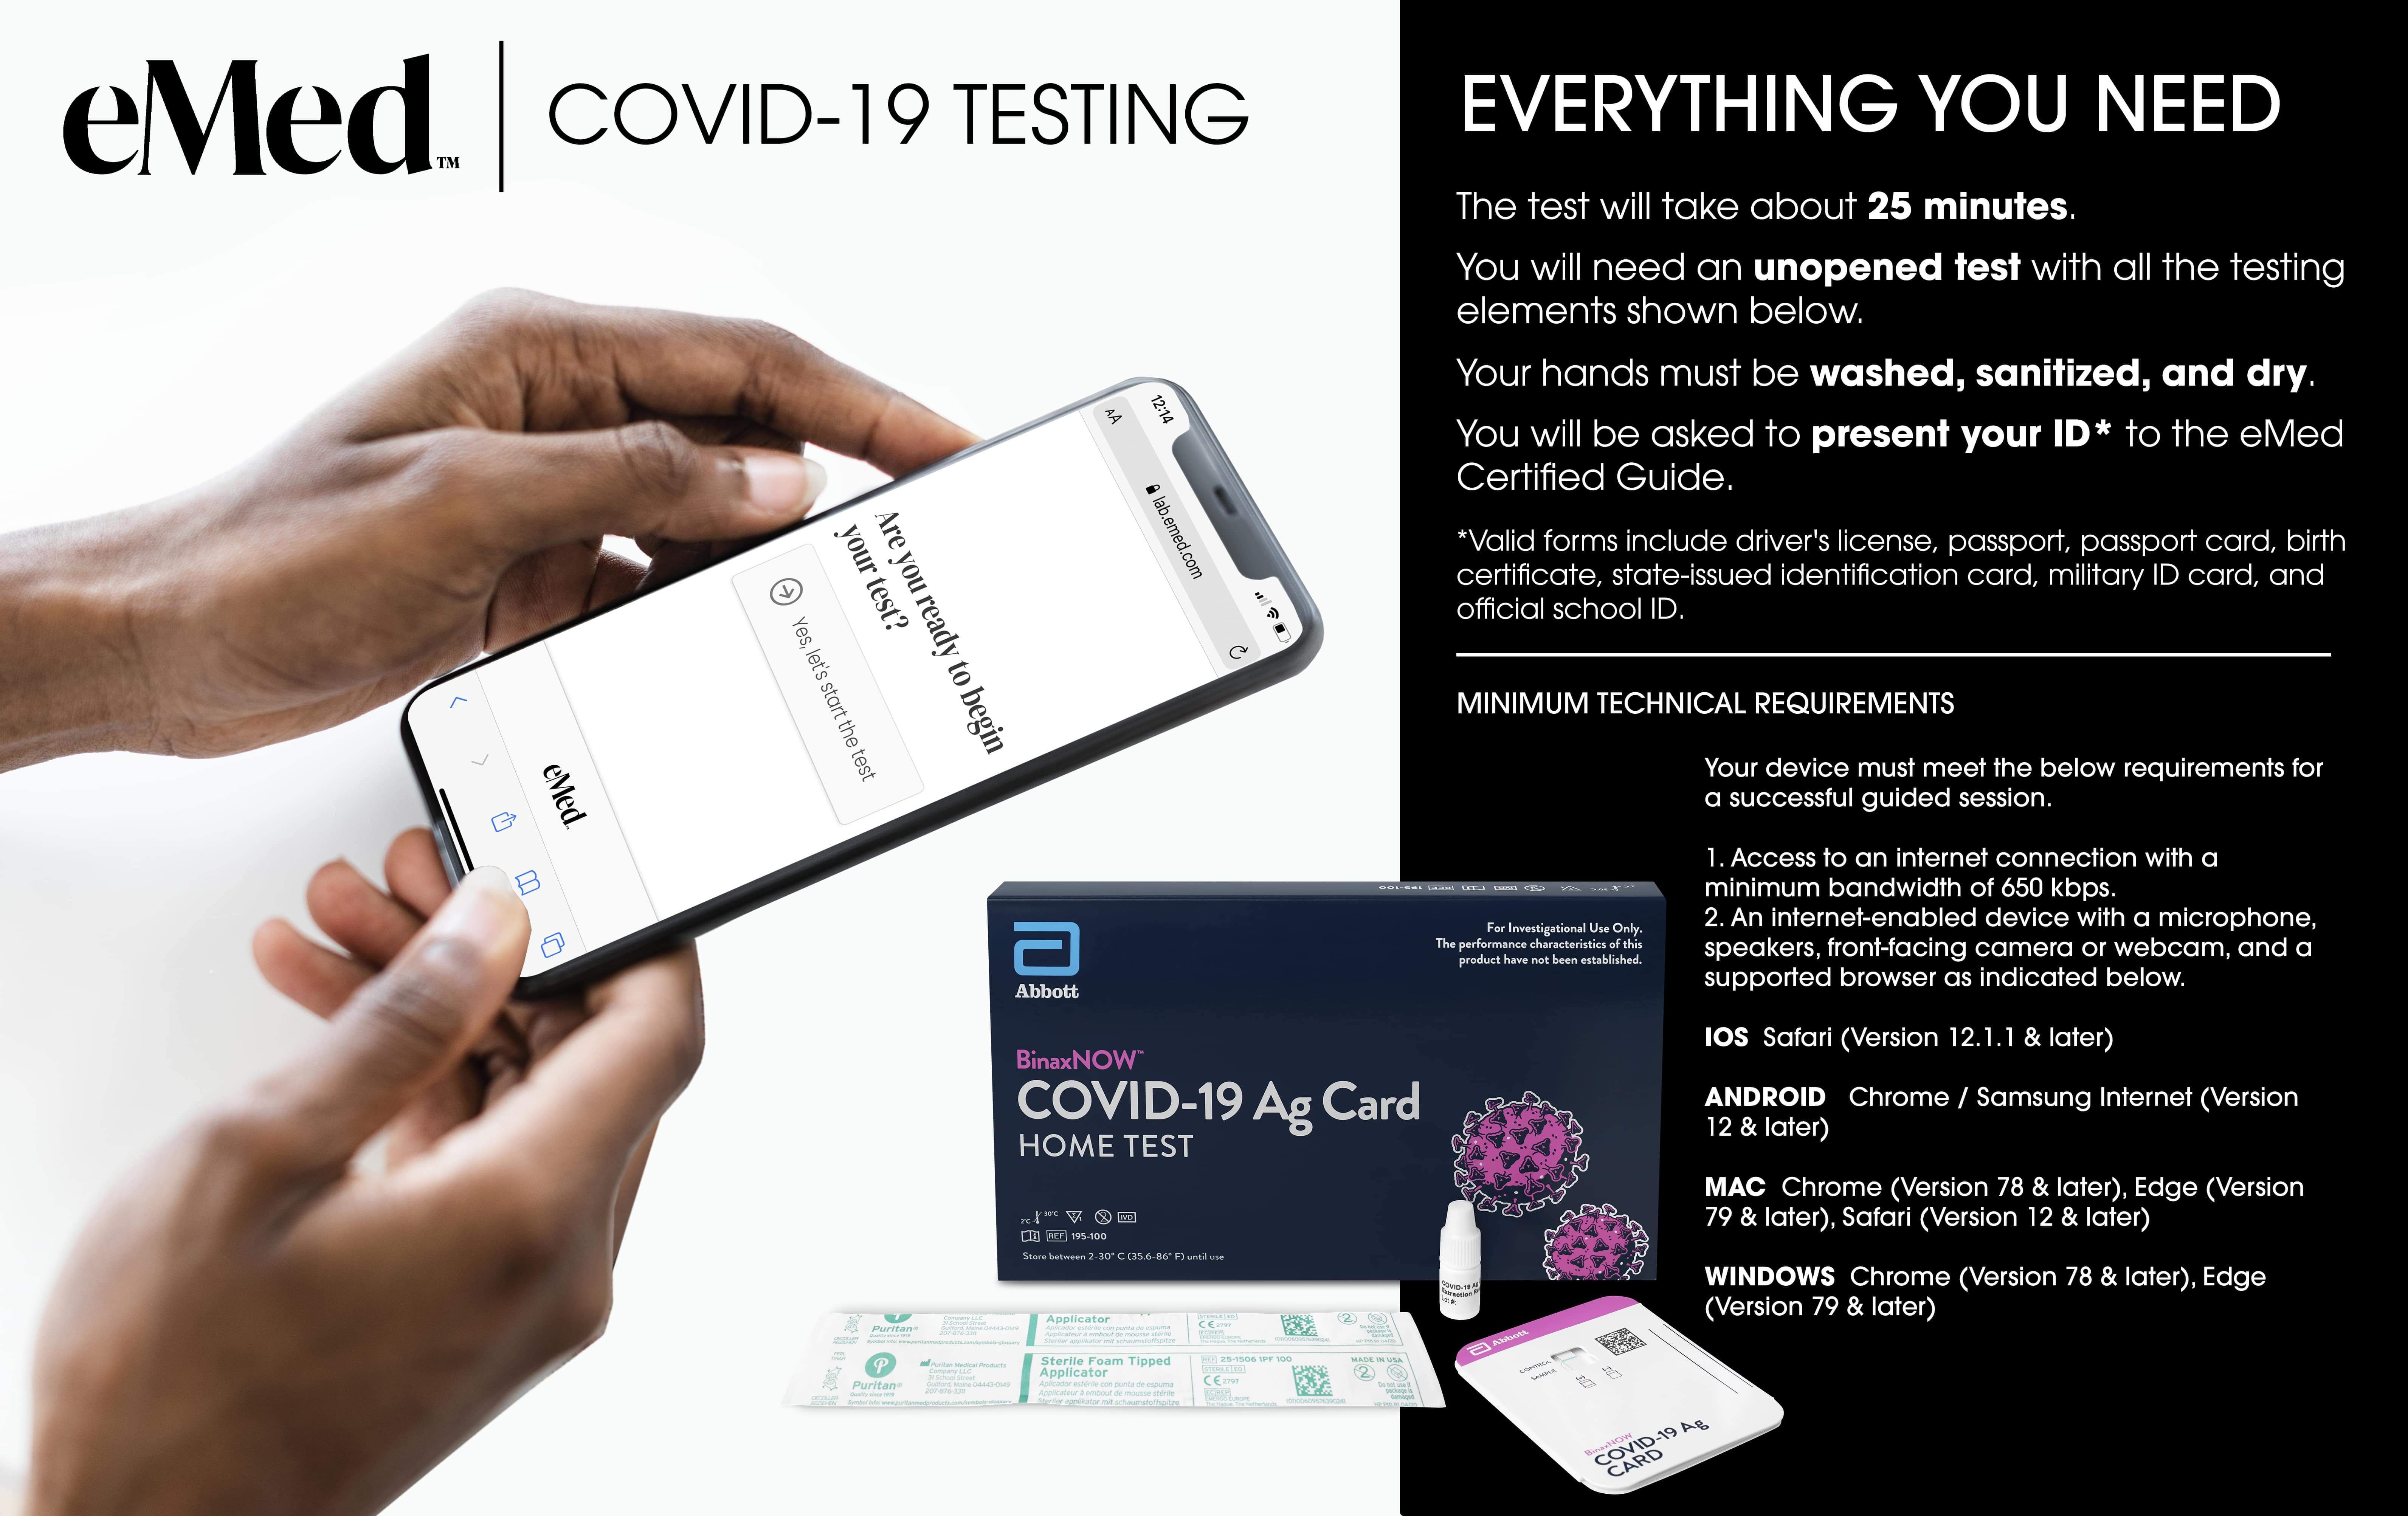 DISCAbbott BinaxNOW™ COVID-19 Antigen Card Home Test with eMed Telehealth Services - 2 Pack for Celebrity Cruises